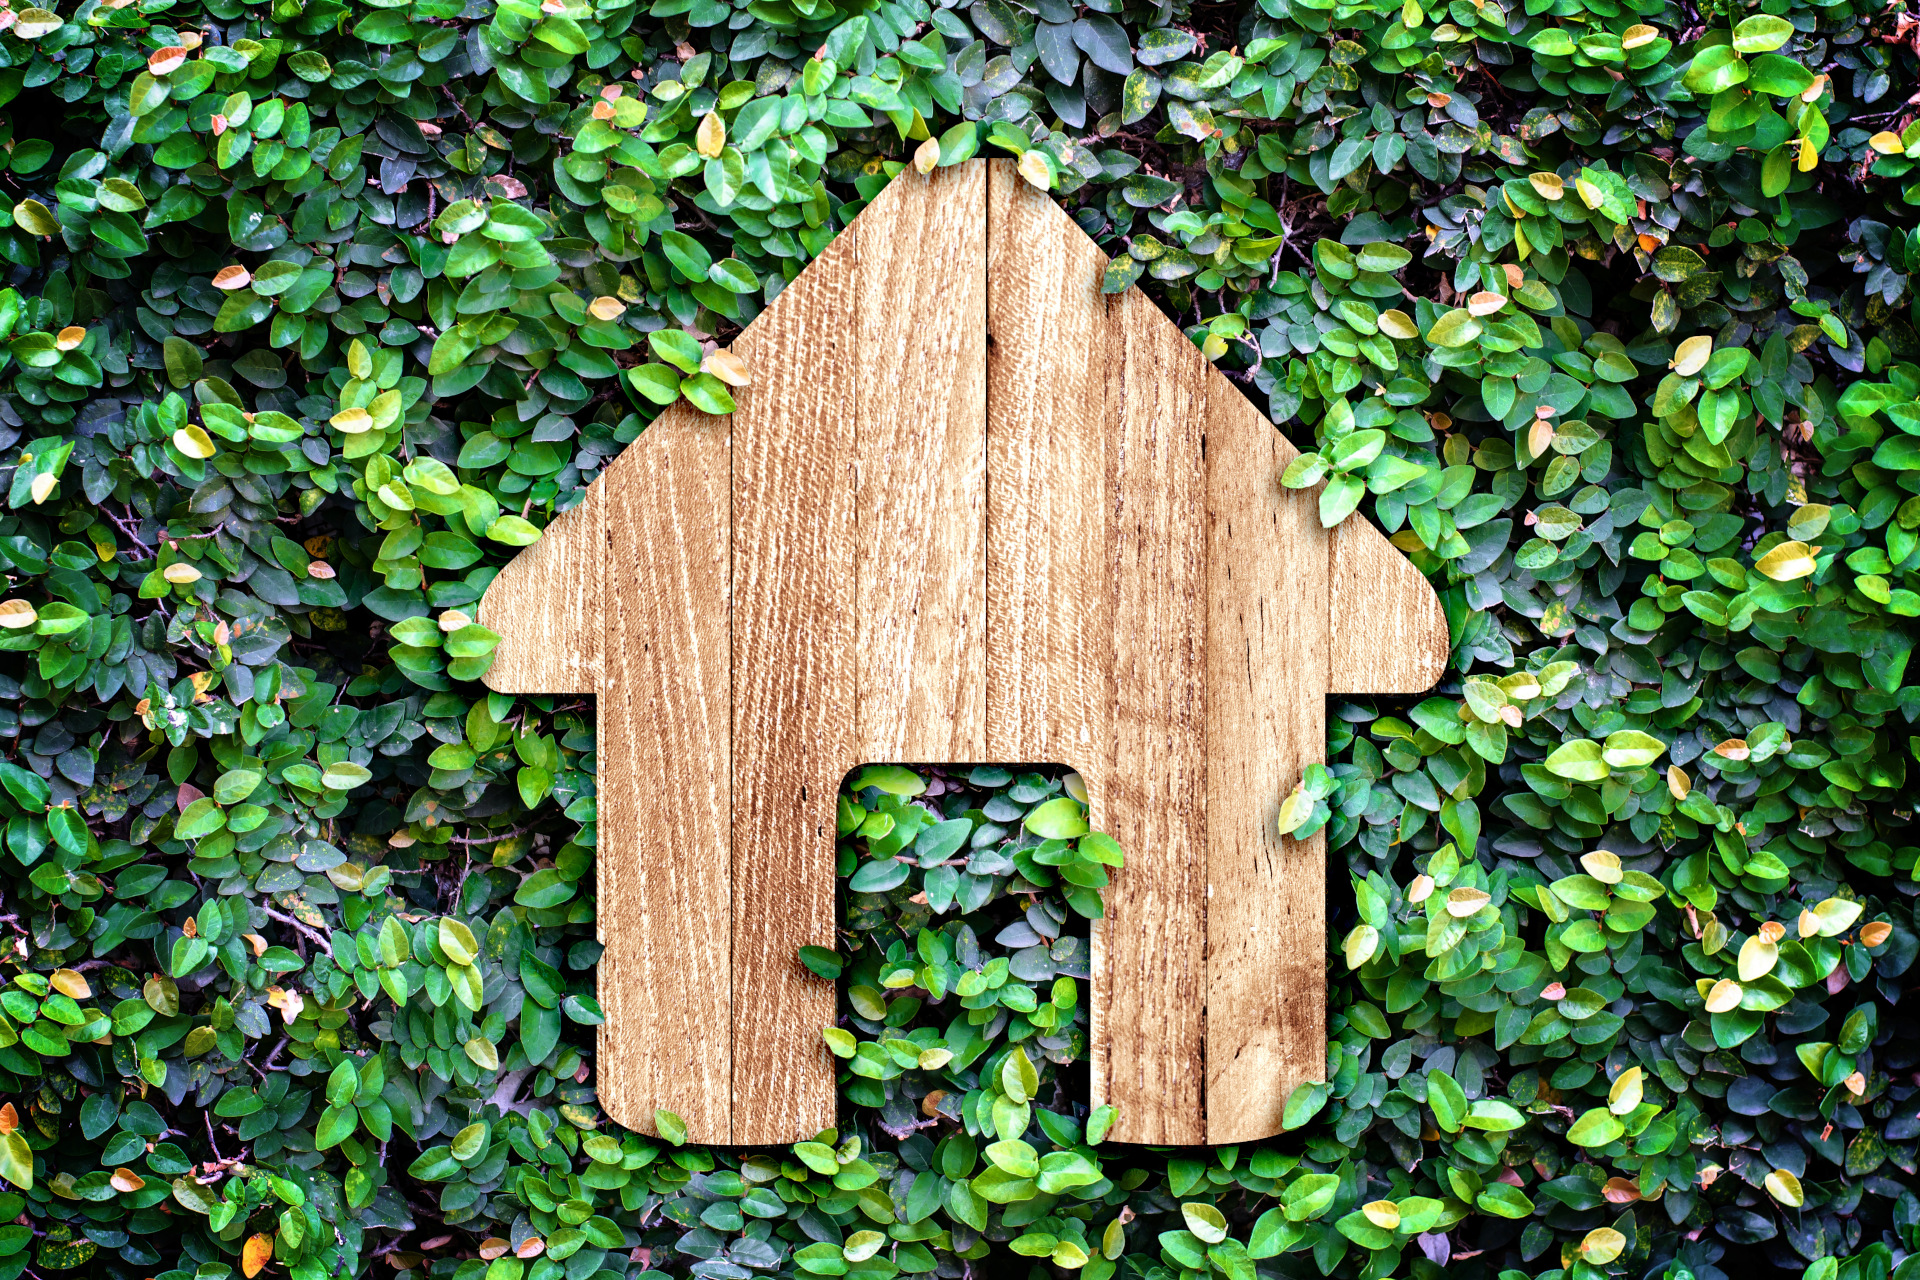 Eco Homes: What You Need to Know